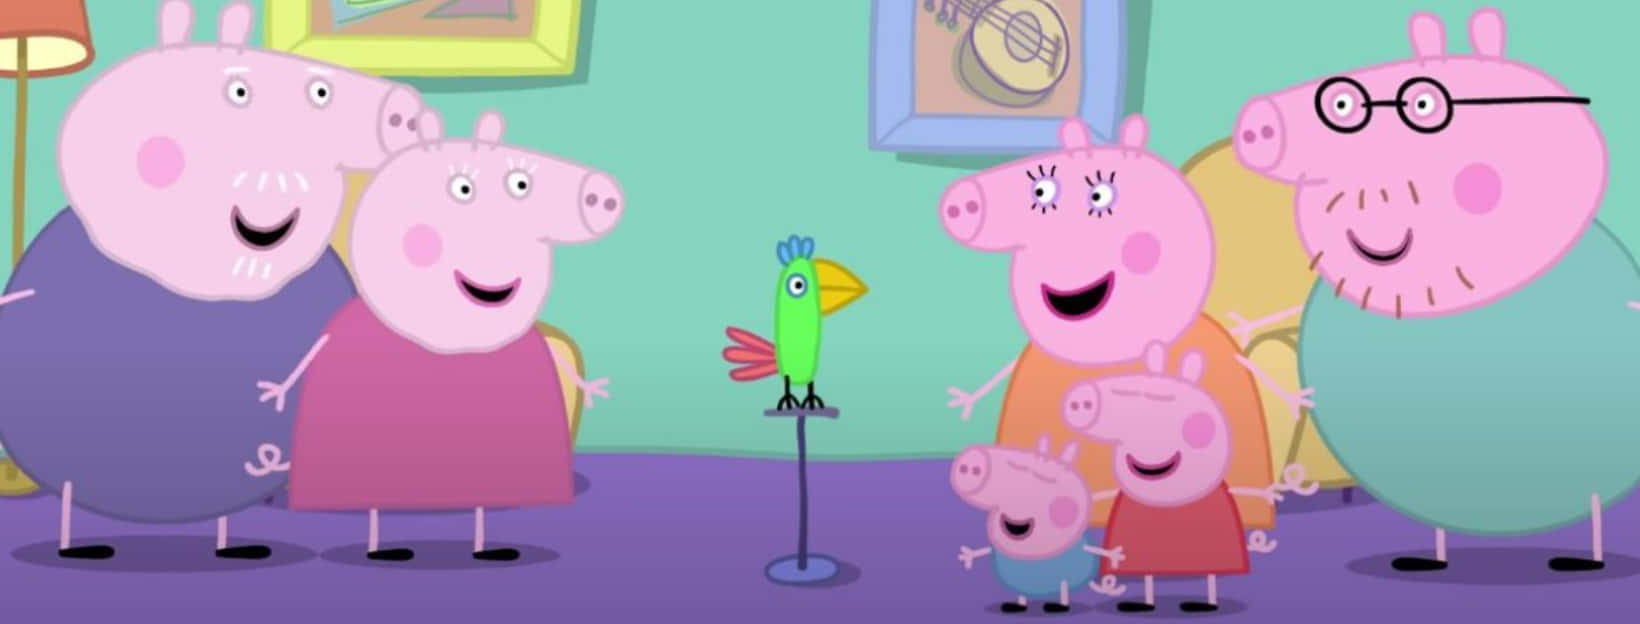 Peppa Pig getting silly with bubbles!